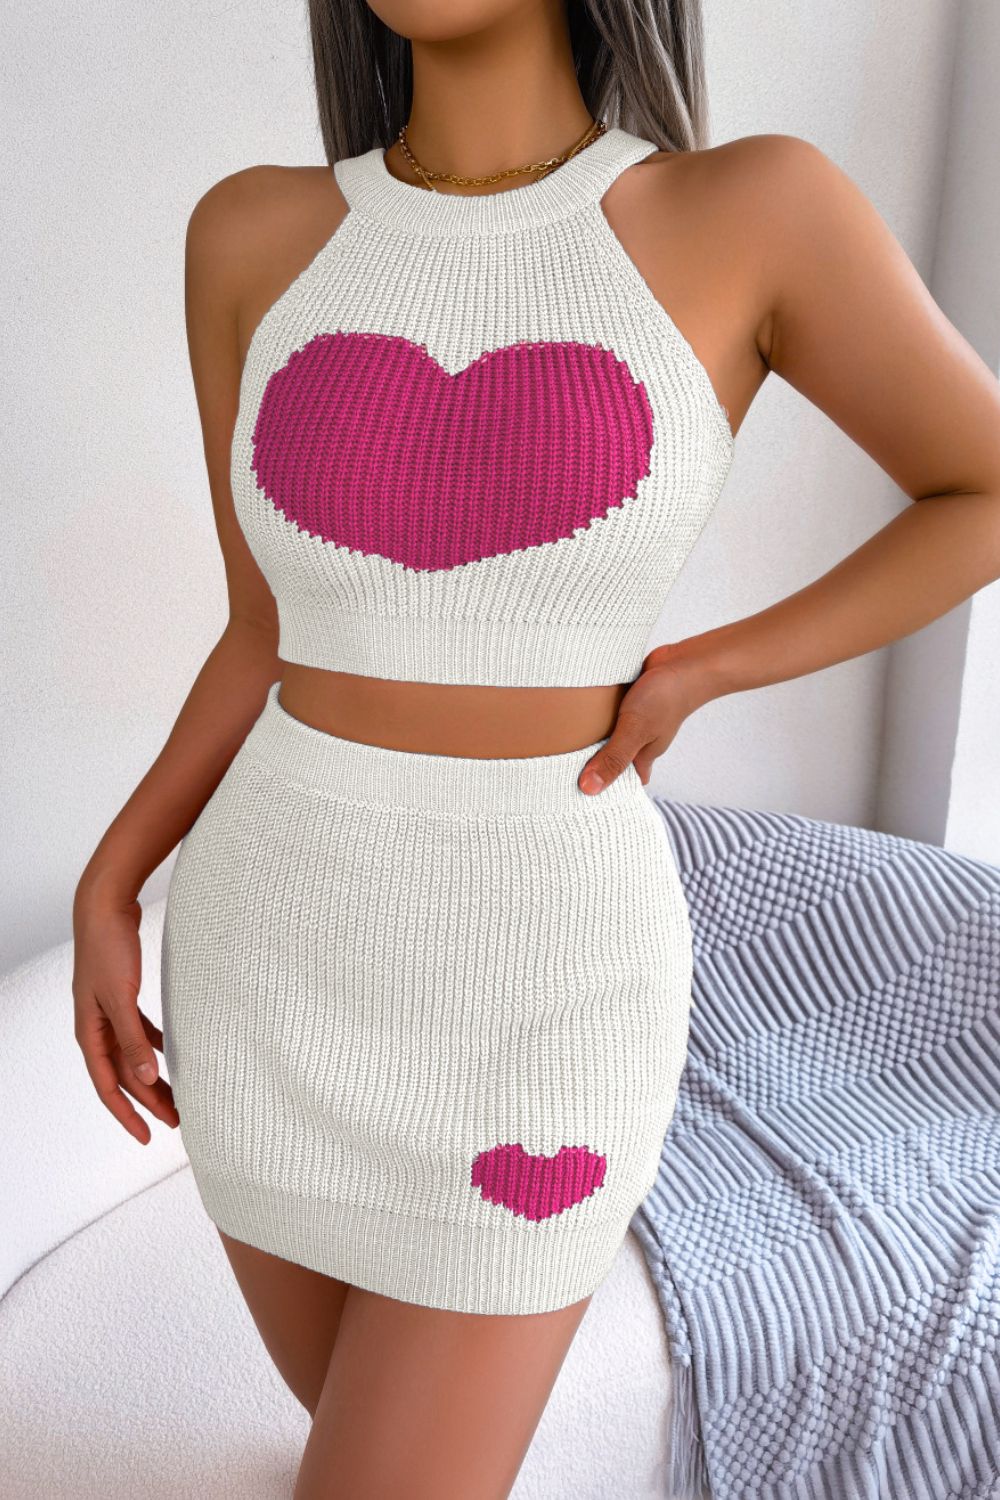 Fashionista Heart Ribbed Sleeveless Knit Top and Skirt Set